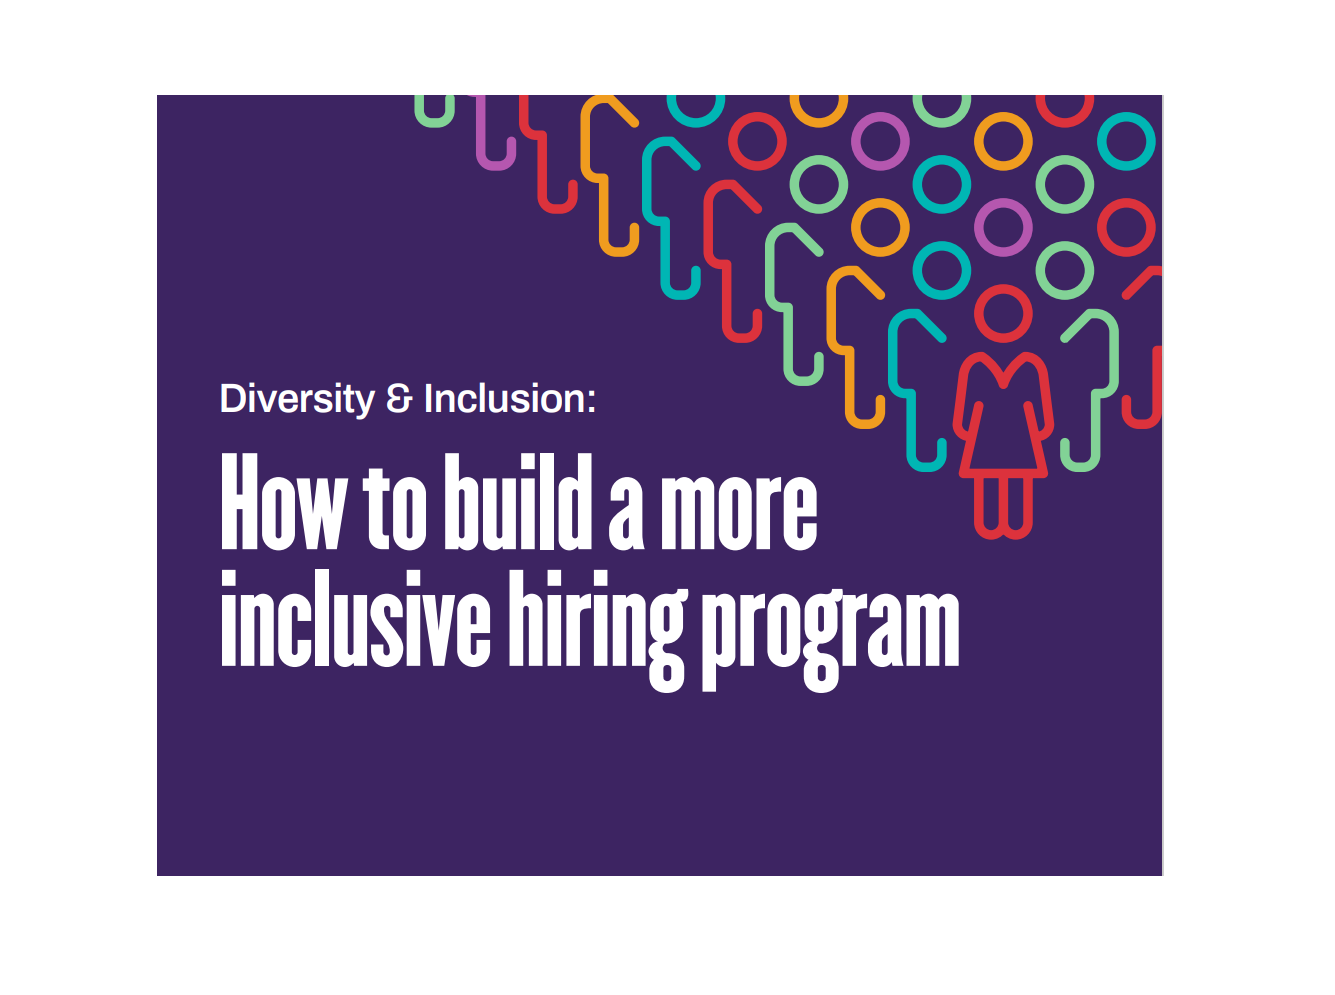 How to build a more inclusive hiring program